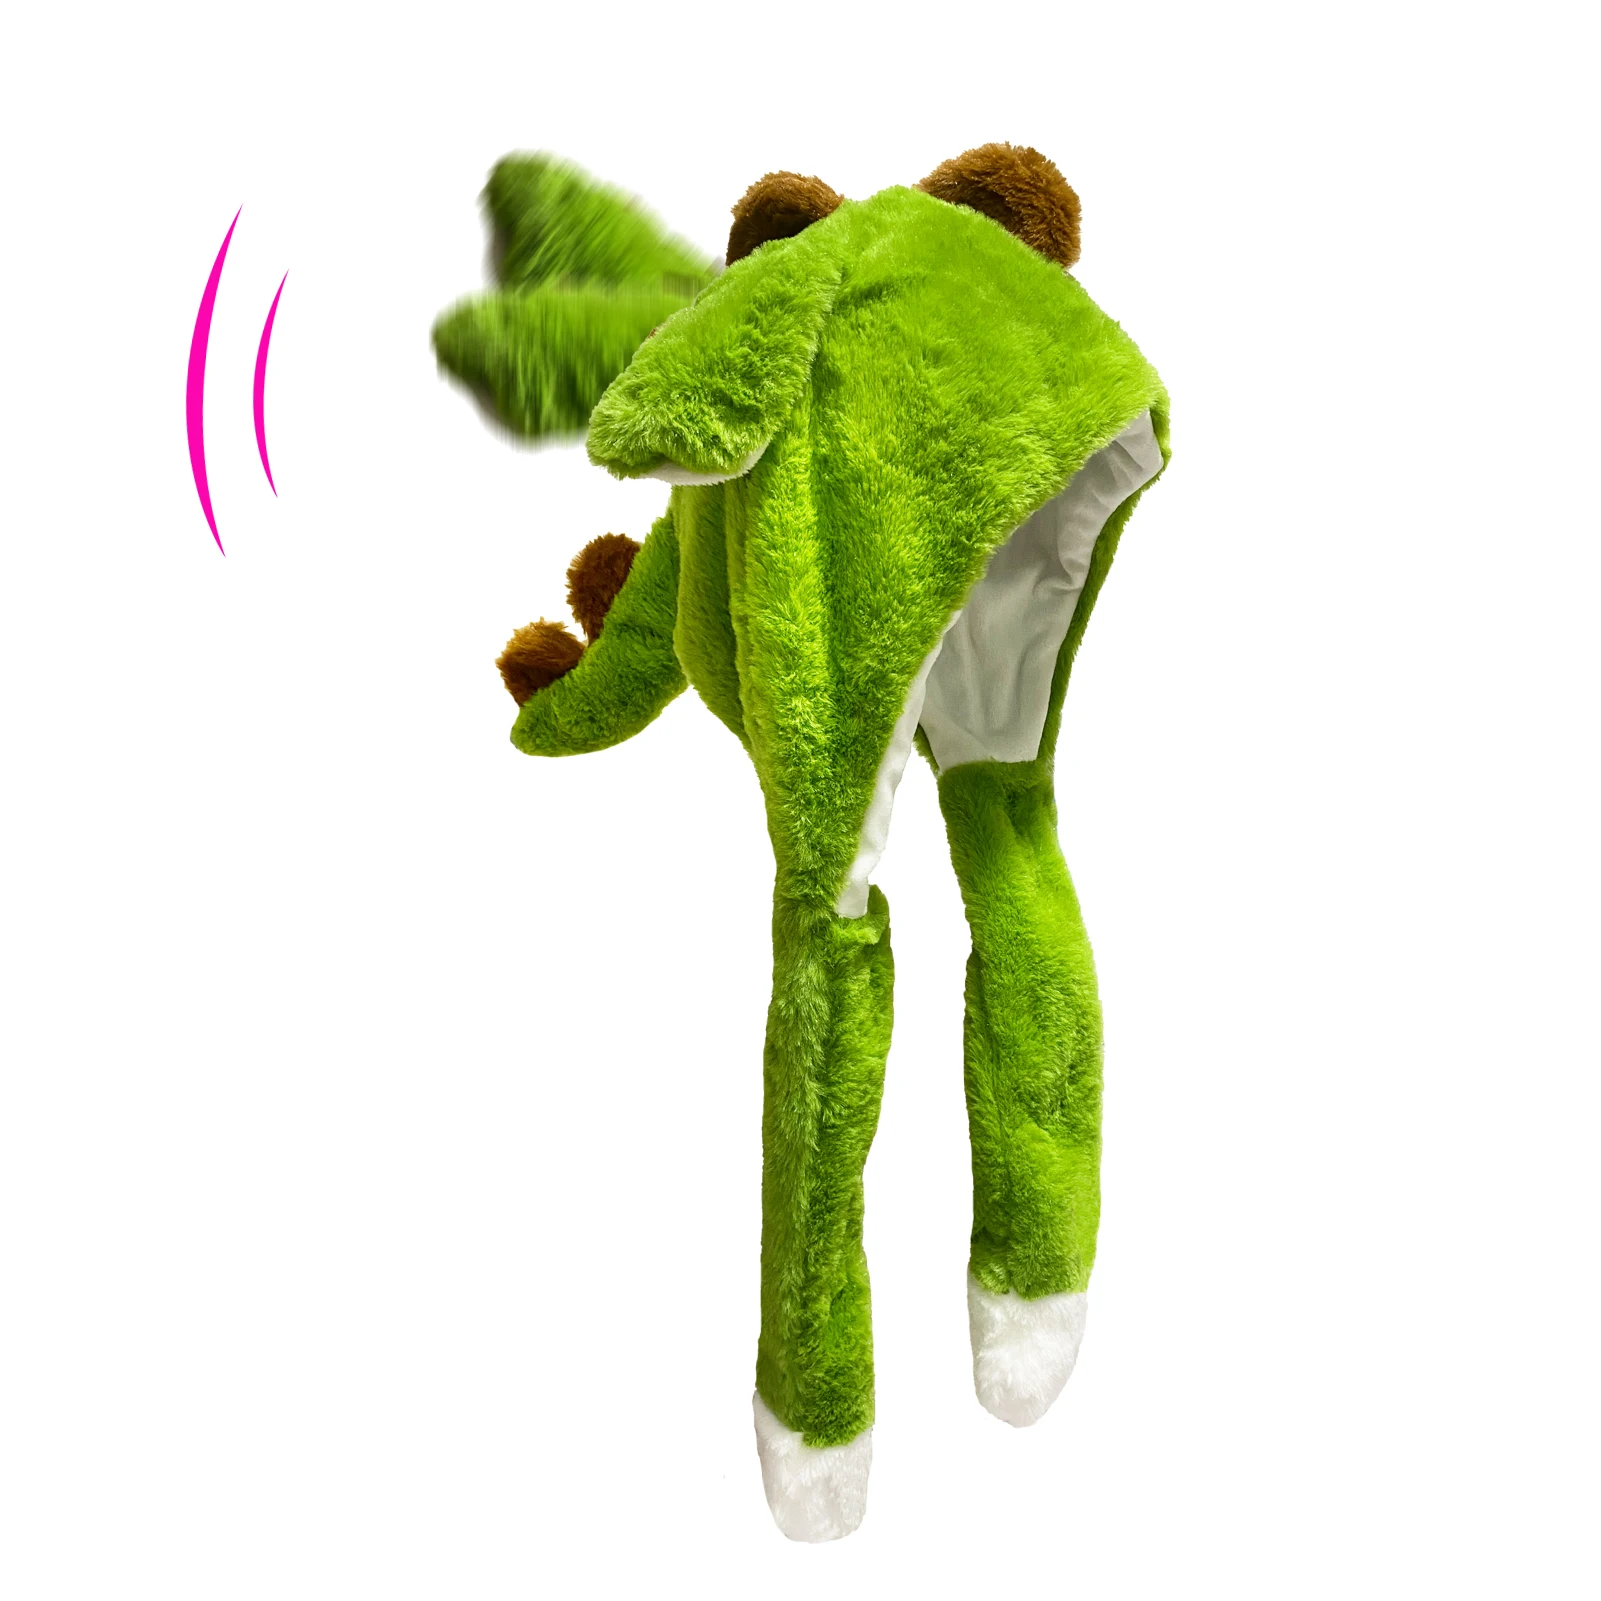 Dinosaur Ear Move Hat Plush Animal Moving Ear Hat Halloween Costume Winter Cap Elk Popup Ears Cap Christmas Funny Jumping Up Hat yellow funny hat baby kids hat cute rabbit ears plush ears can move cap children winter warm party hat funny hat for girls